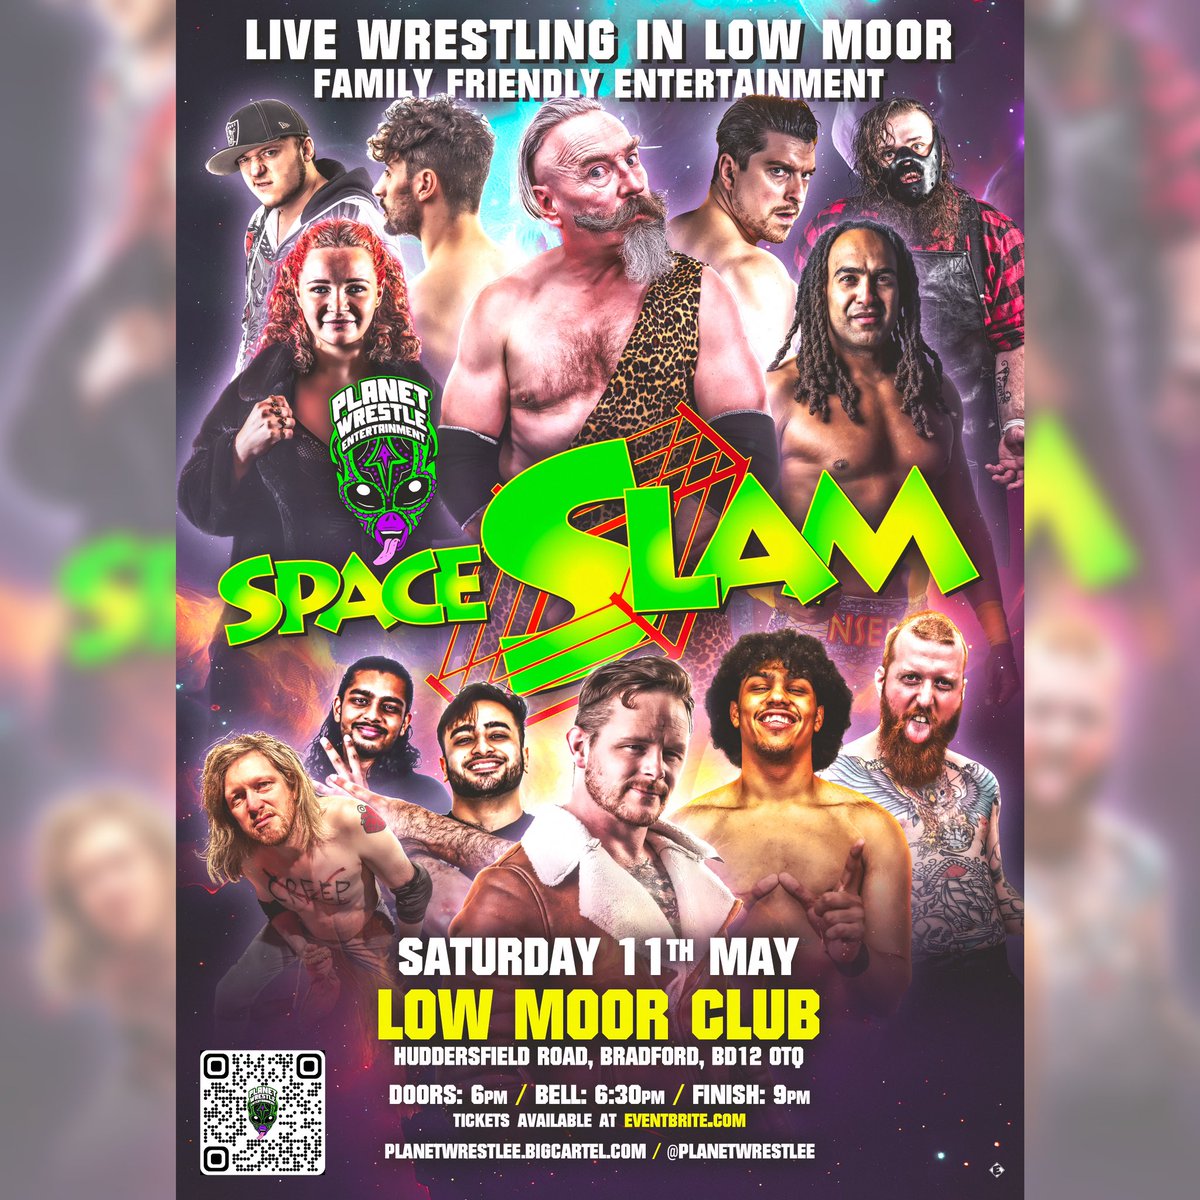 Planet Wrestle Entertainment presents SPACESLAM! 👽🛸 We return to Low Moor on the 11th of may to showcase the best wrestlers this galaxy has to offer!! Get tickets now at eventbrite.co.uk/e/live-wrestli…